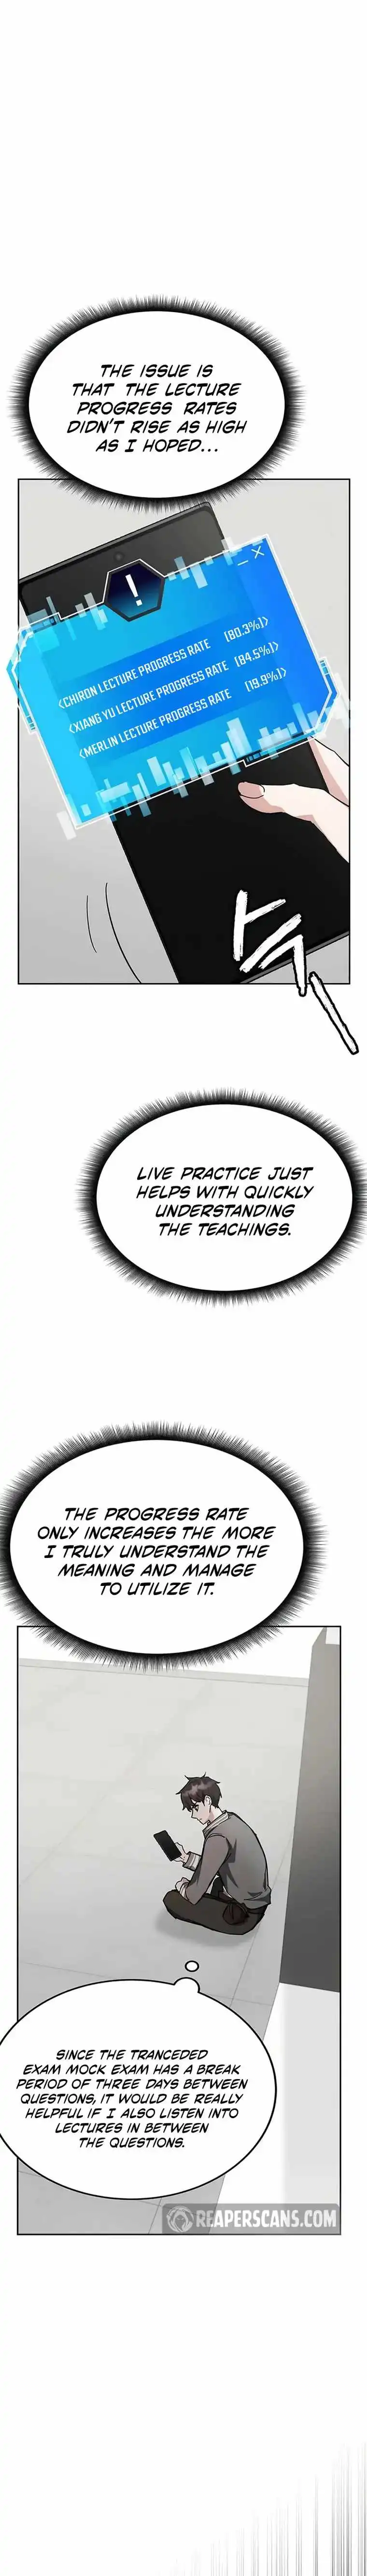 Transcension Academy Chapter 28